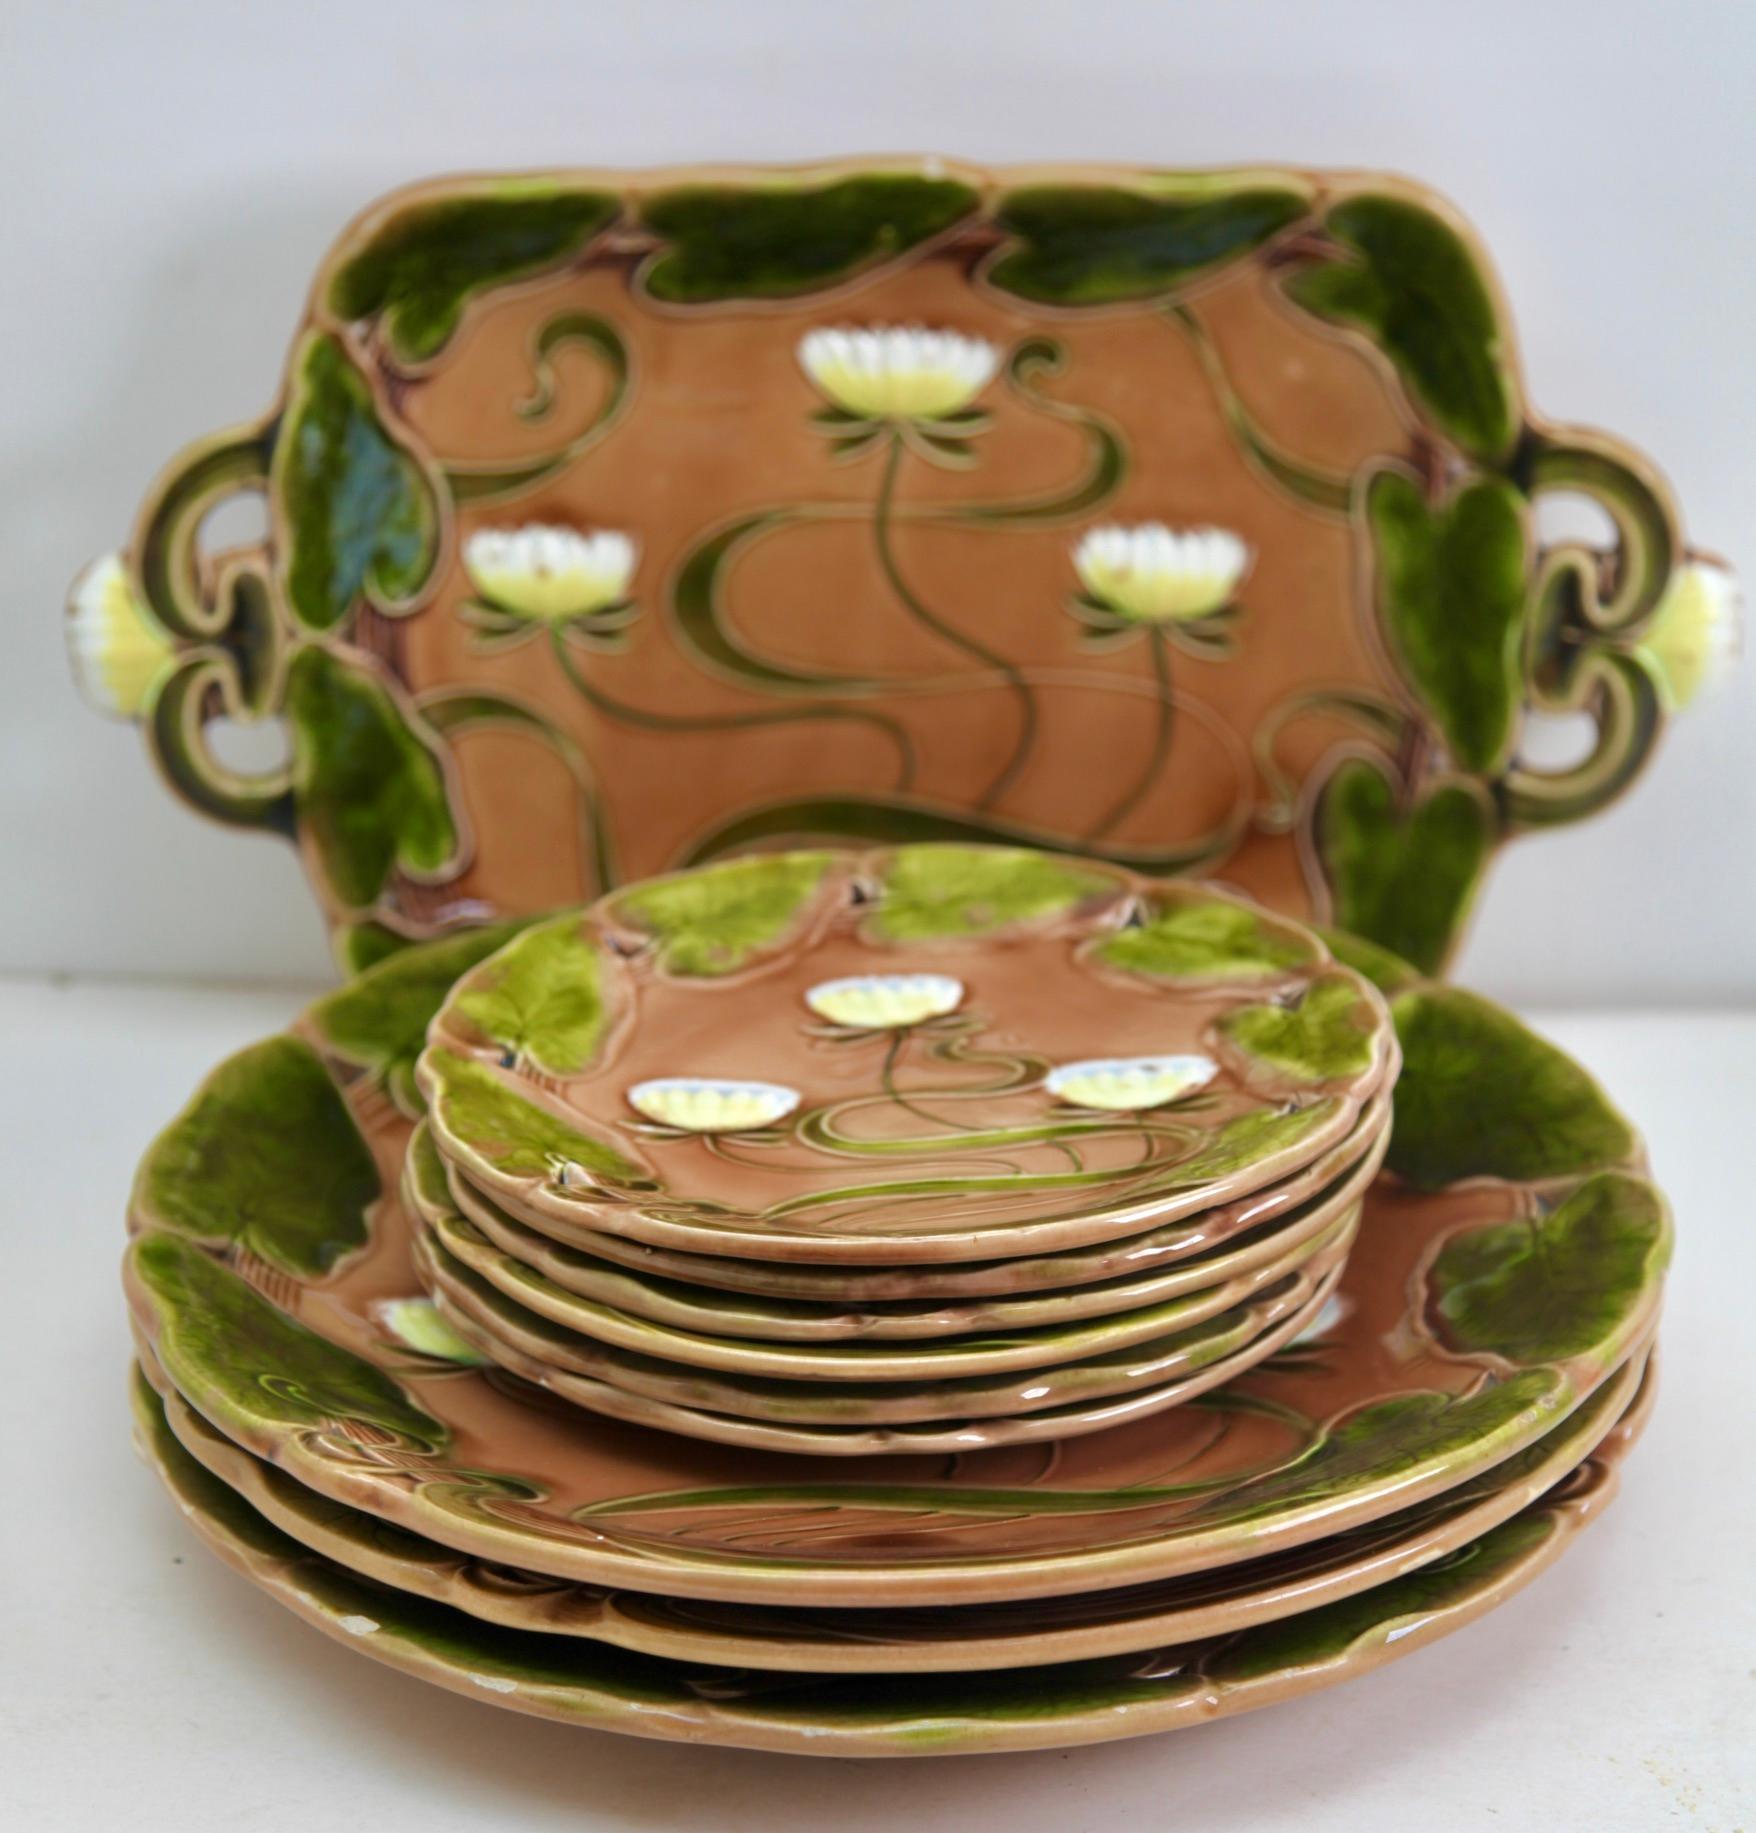 Art Nouveau Villeroy et Boch Stamp Schramberg Majolica, Water Lily Pattern, Dish and 9 assiettes. 
Majolica is a type of earthenware, decorated Water Lily with coloured lead glazes. 
Victorian Majolica was made between 1849 and 1900.

Measure: